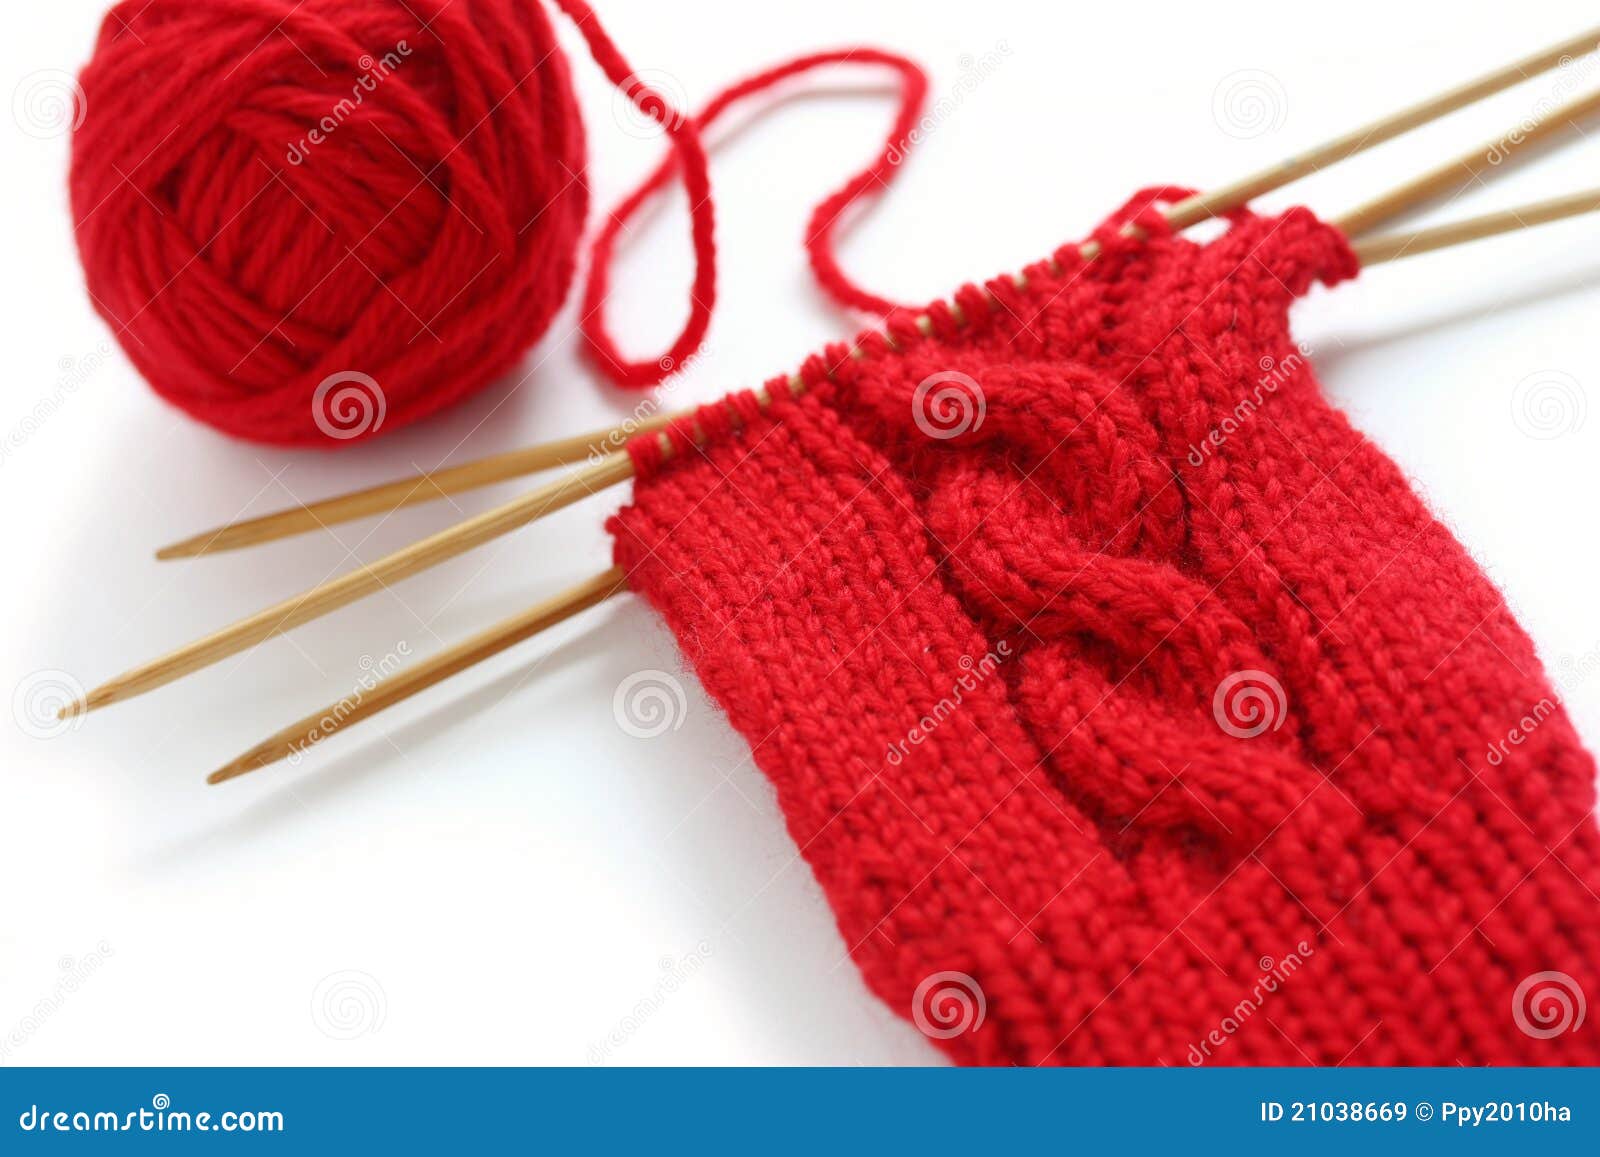 Knitting a Red Yarn Ball with Noodles Stock Image - Image of ball ...